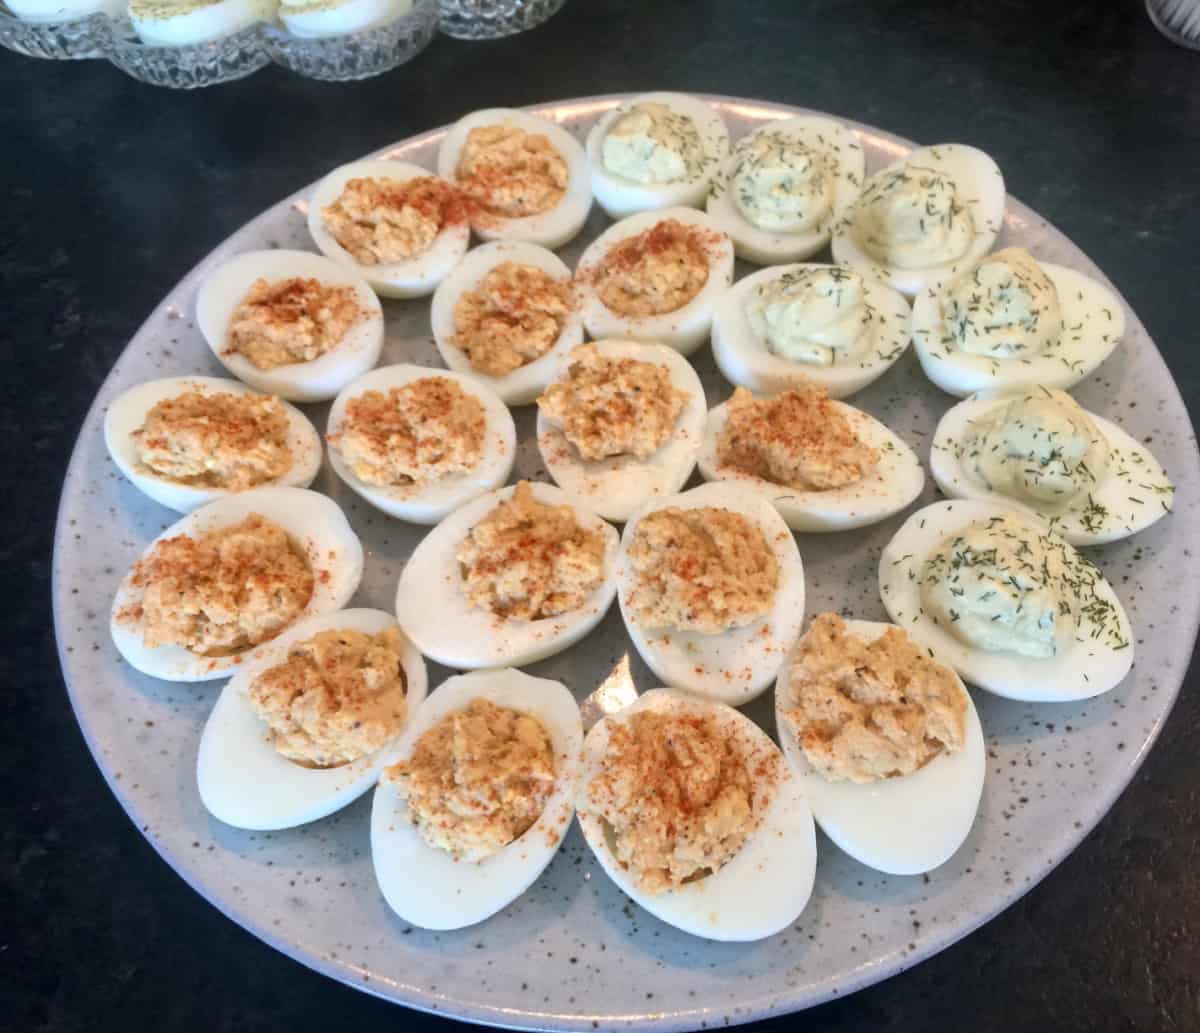 Platter of Deviled Eggs Garnished with Paprika and Dill